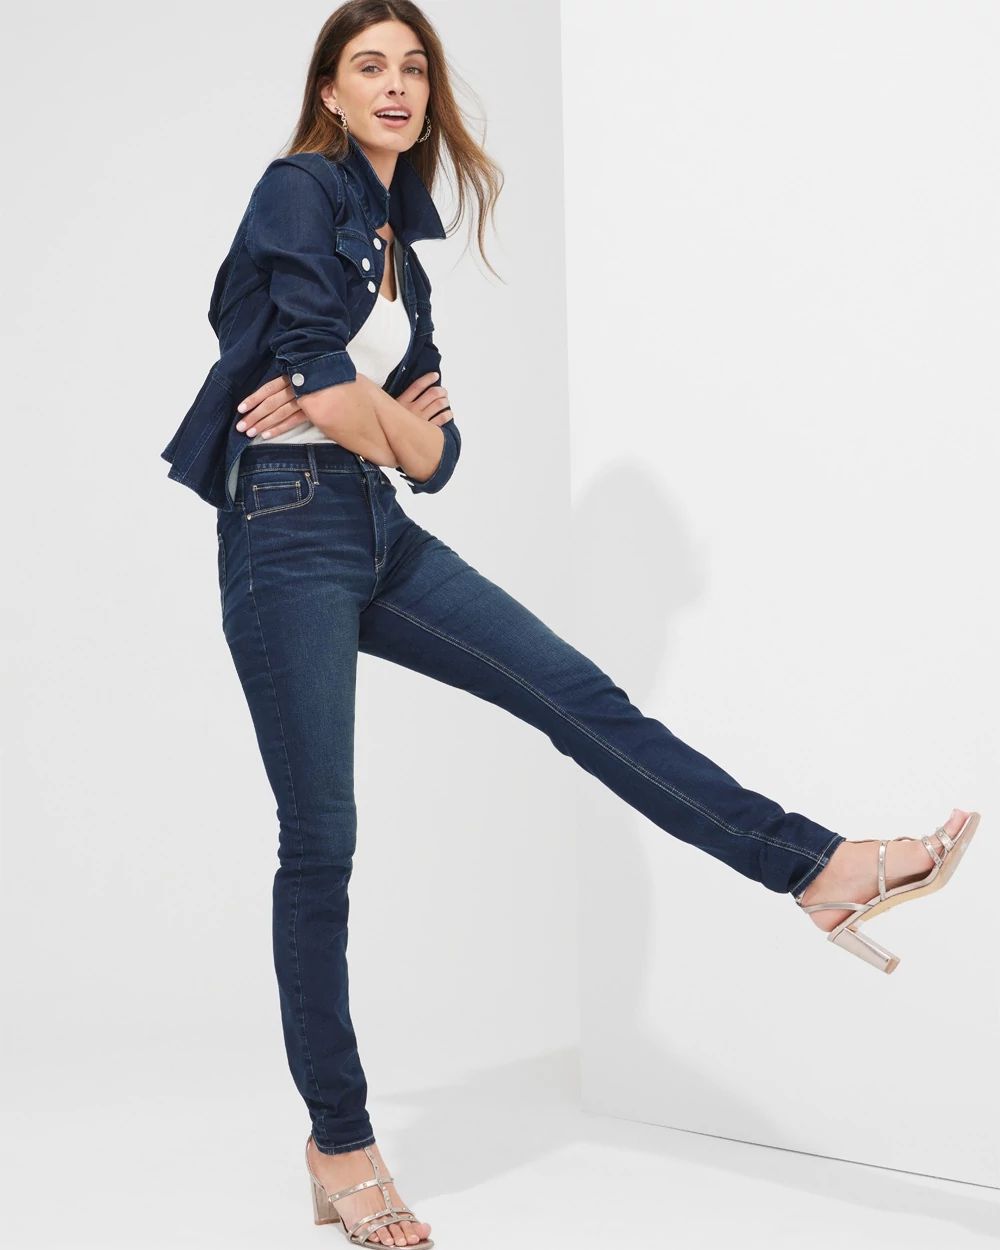 Outlet WHBM High Rise Skinny Jeans click to view larger image.